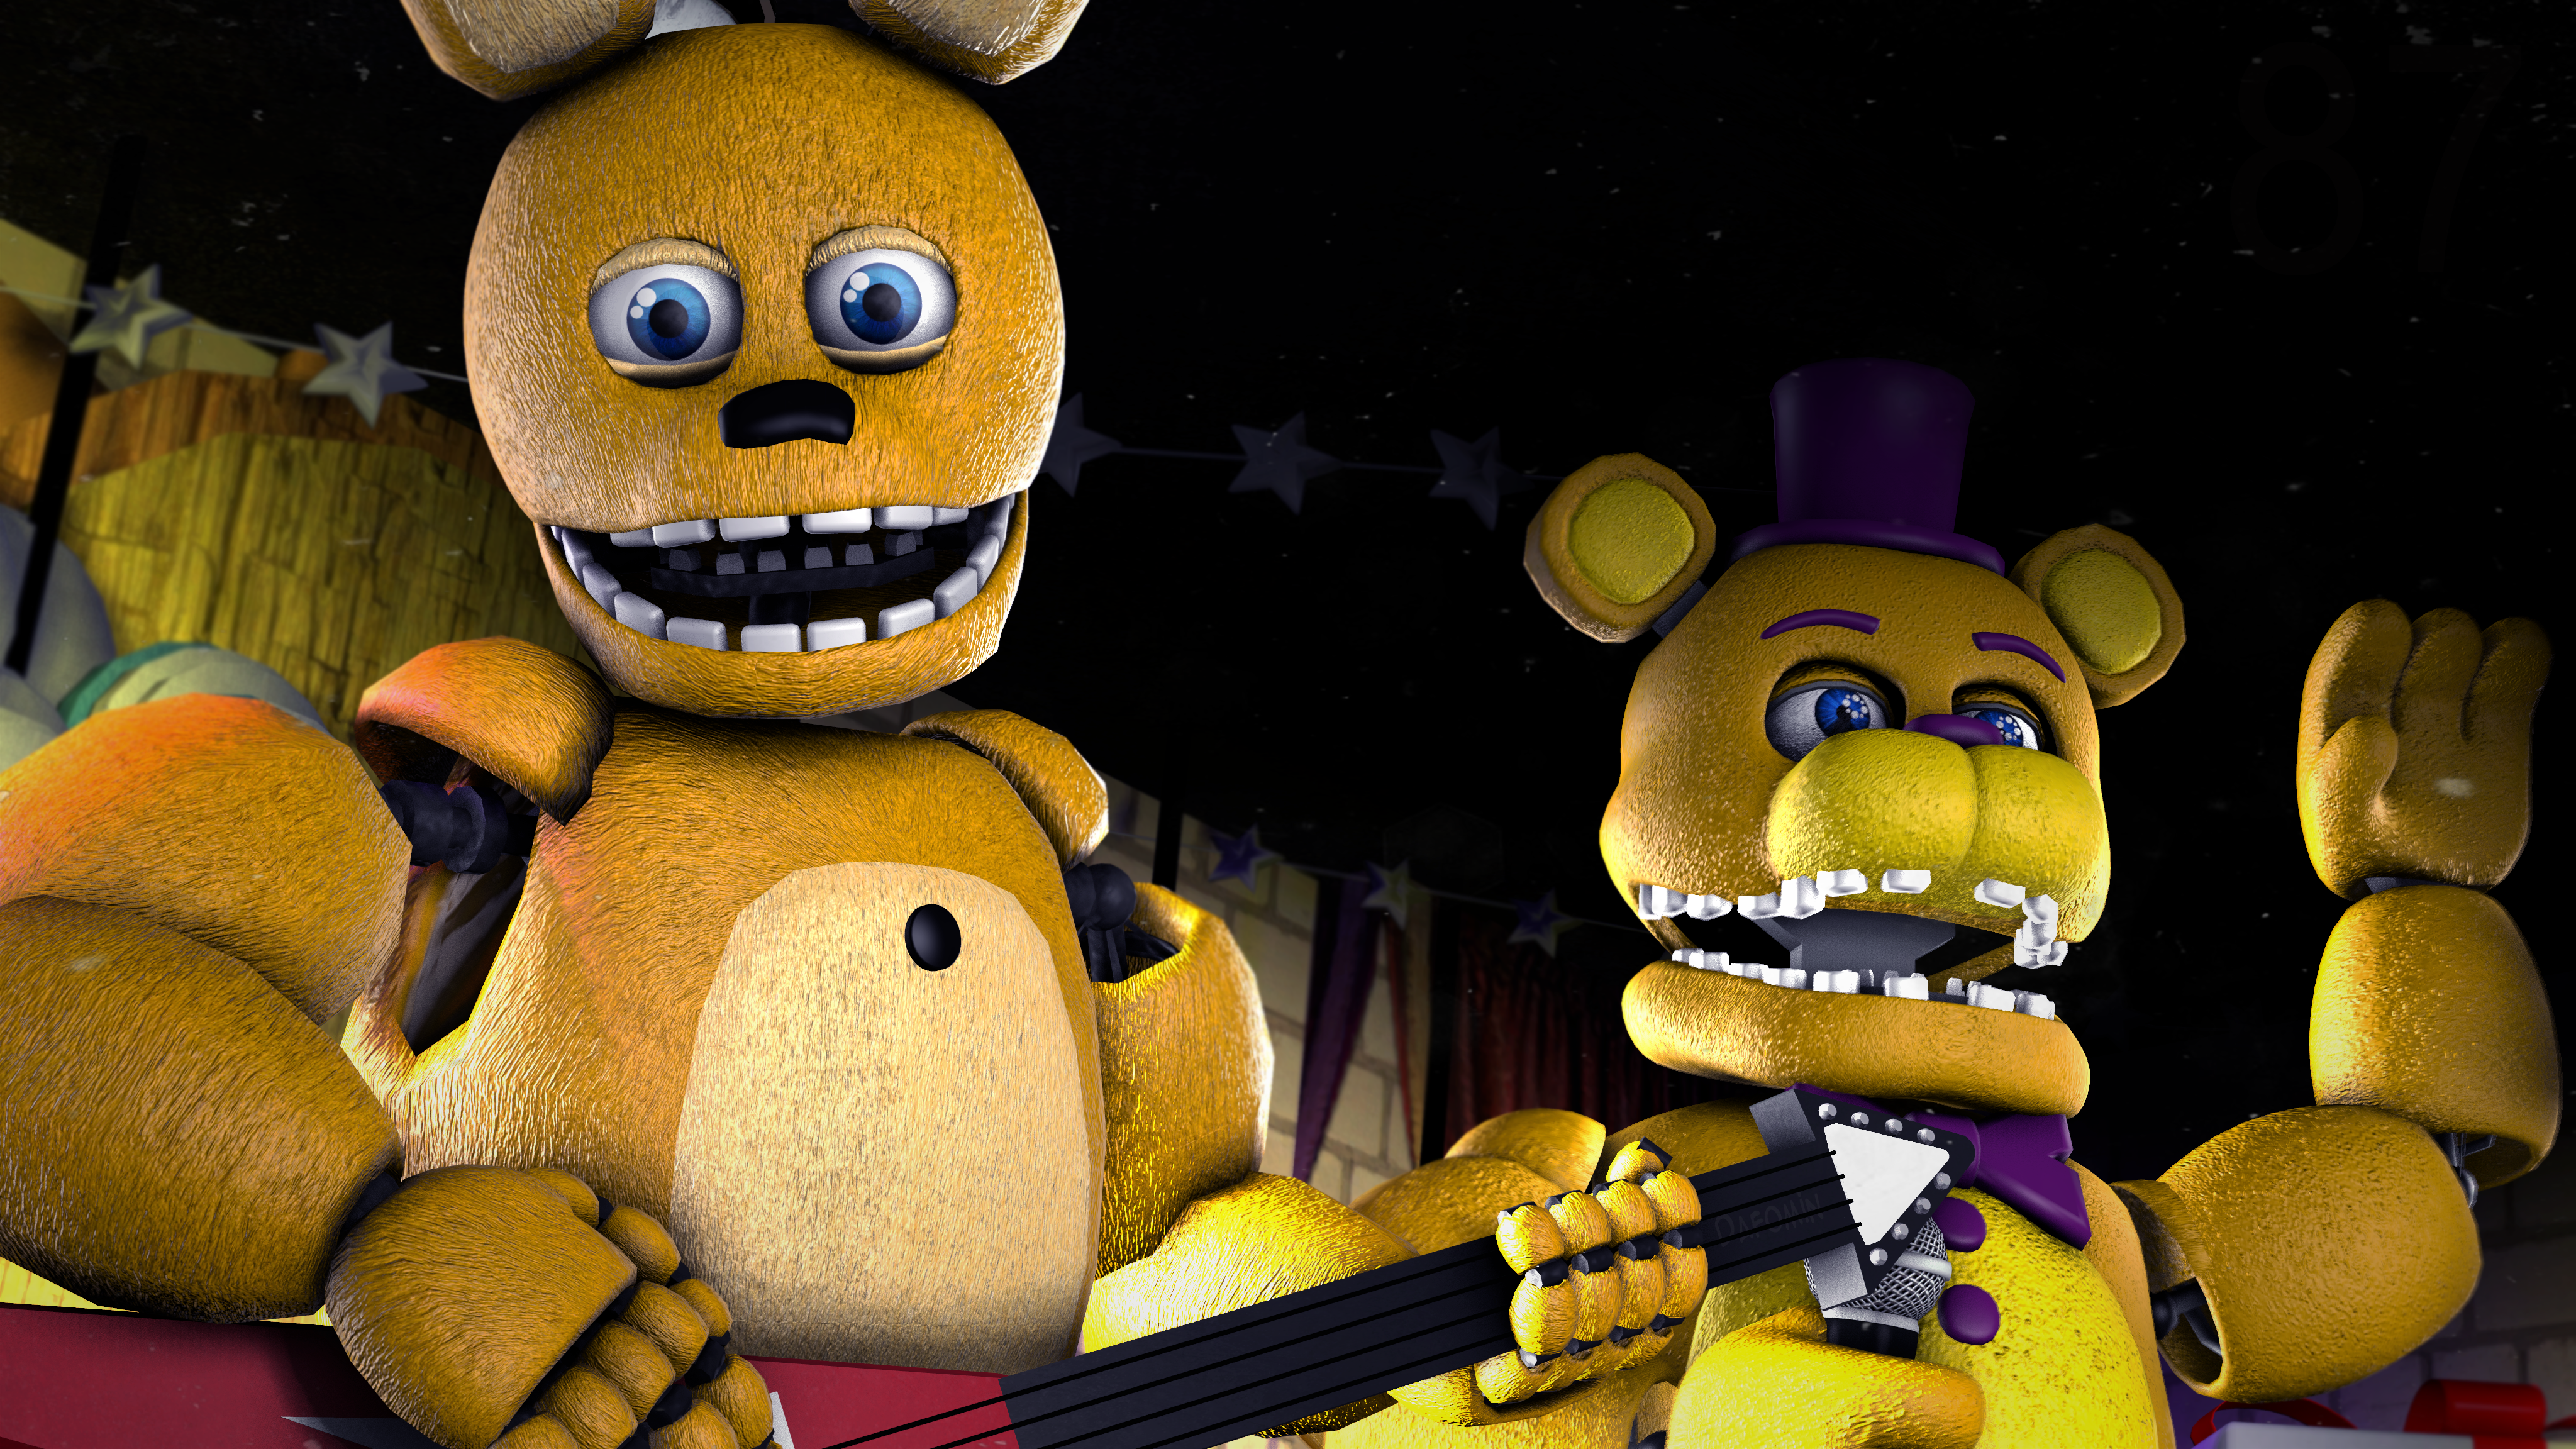 Property of Fredbear's Family Diner by Endo-003 on DeviantArt